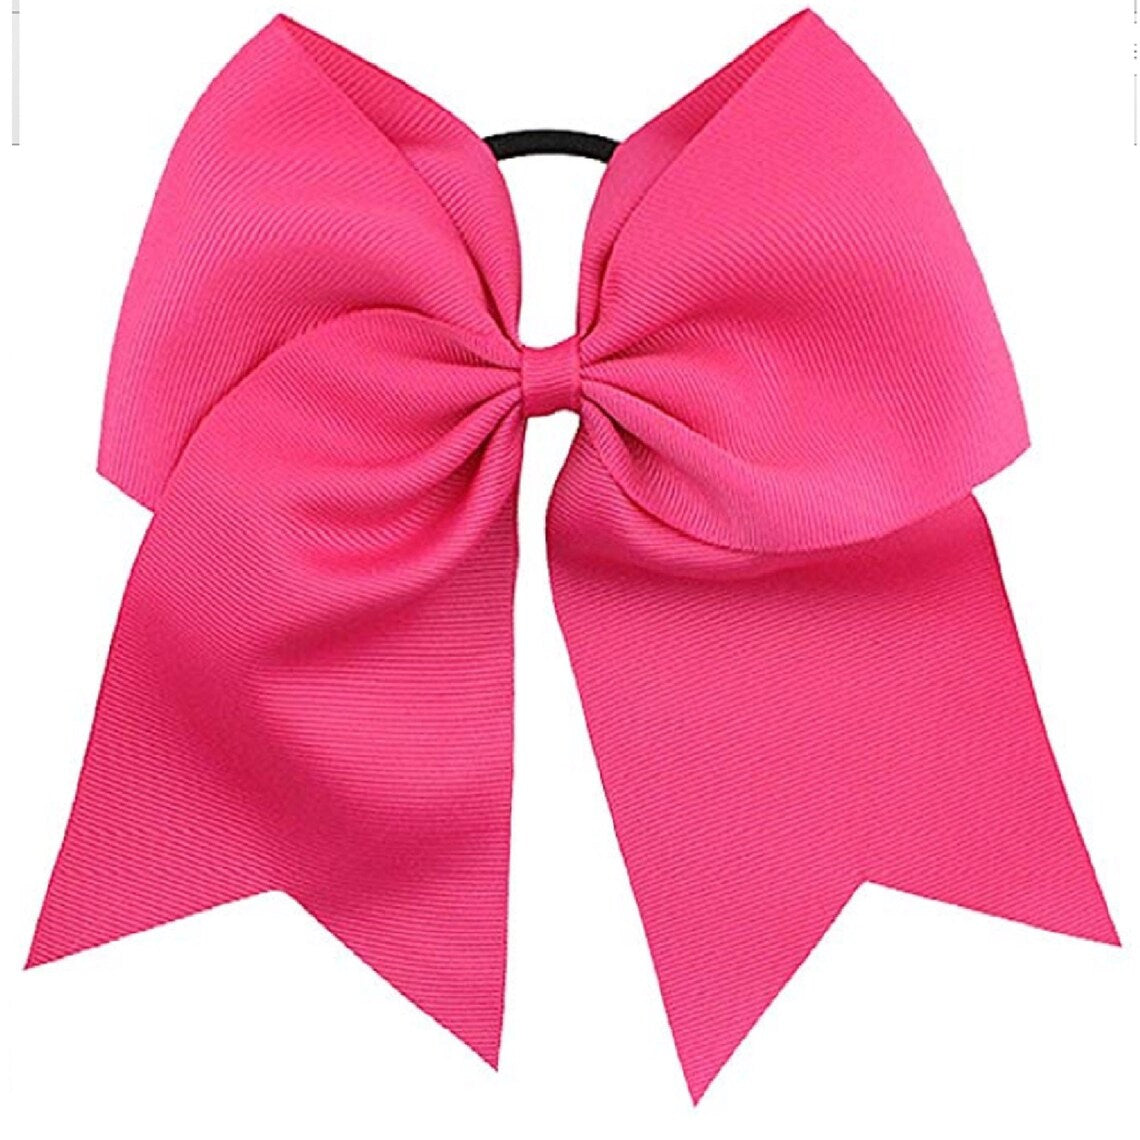 Lions Cheer Bow Design 2